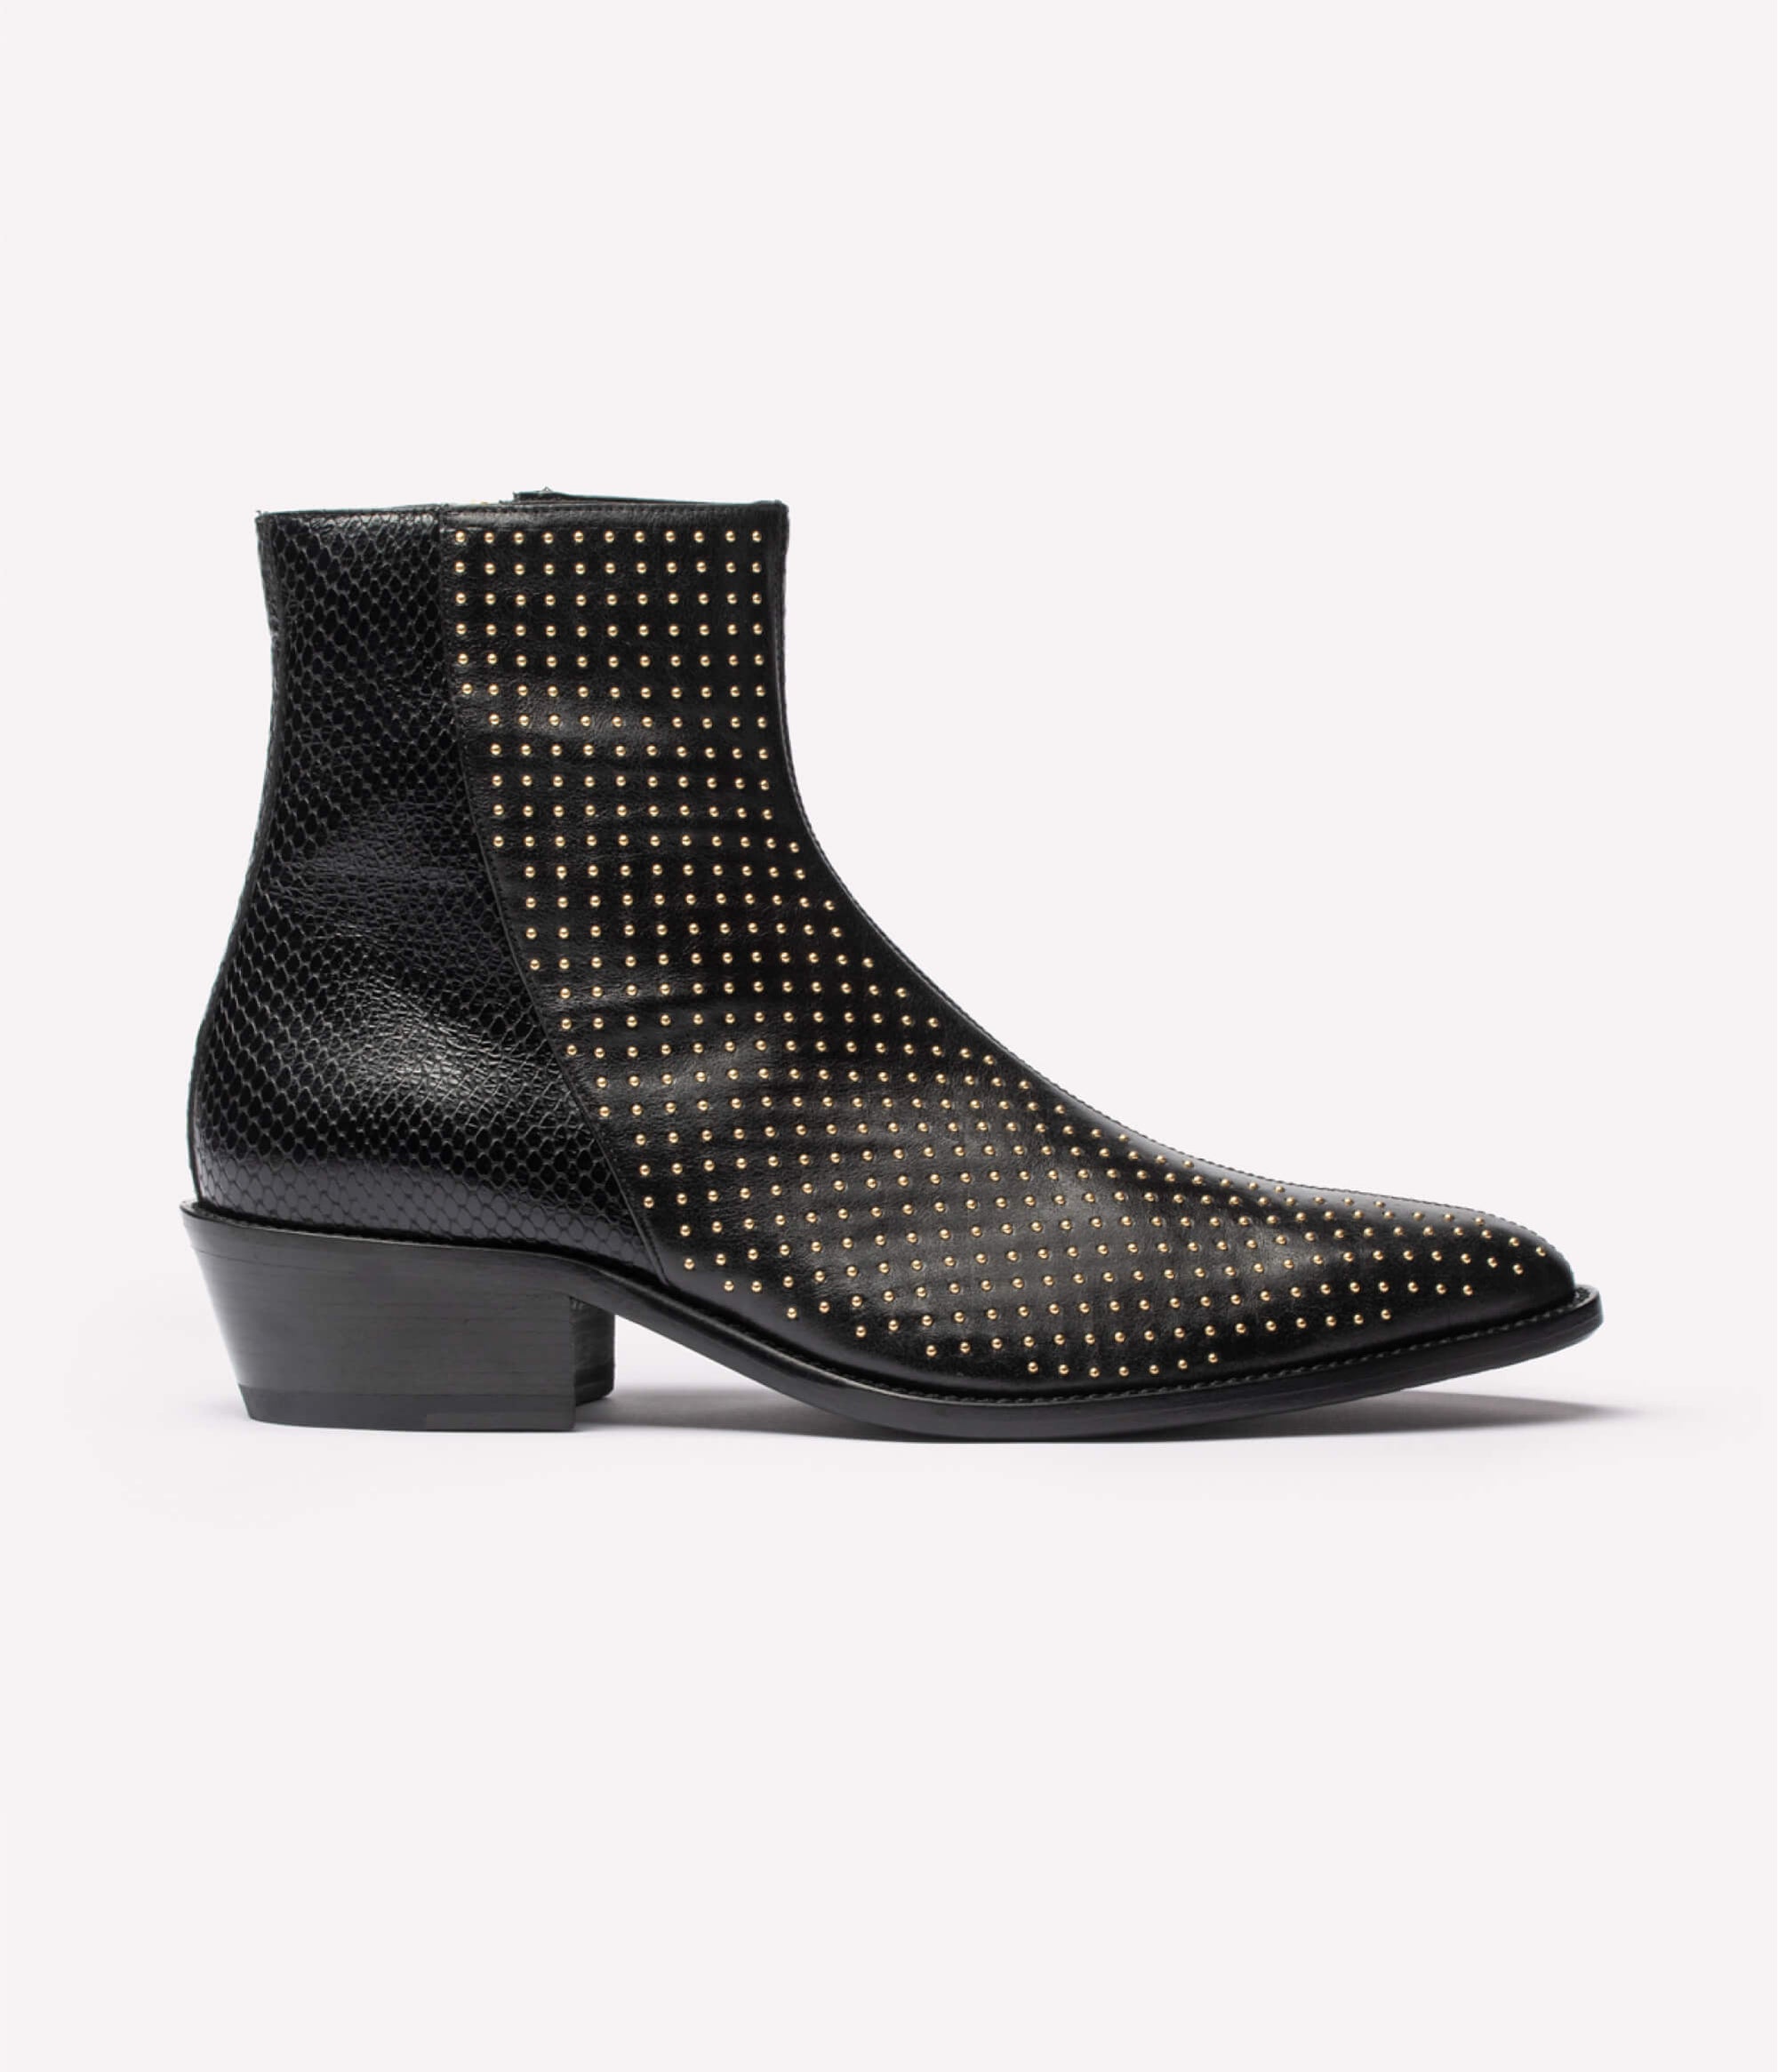 HUMAN RECREATIONAL SERVICES LUTHER BOOT IN STUD BLACK ITALIAN LEATHER